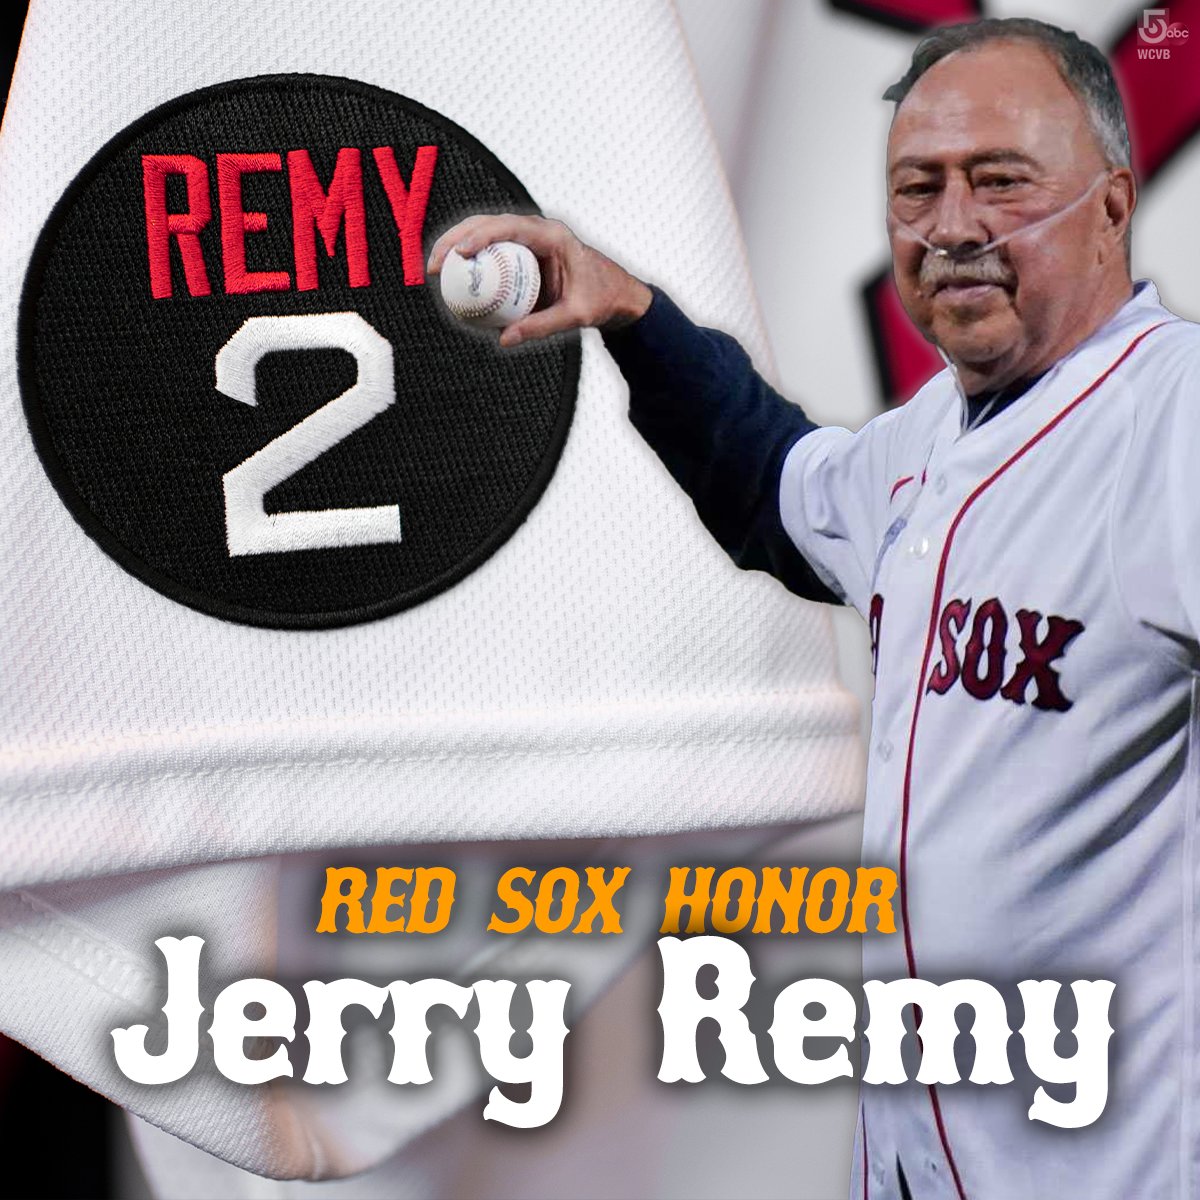 ⚾ Throughout the upcoming season, the #Boston #RedSox will wear a special patch in honor of #JerryRemy. They'll also hold a special pregame ceremony in his memory next month. wcvb.com/article/boston…